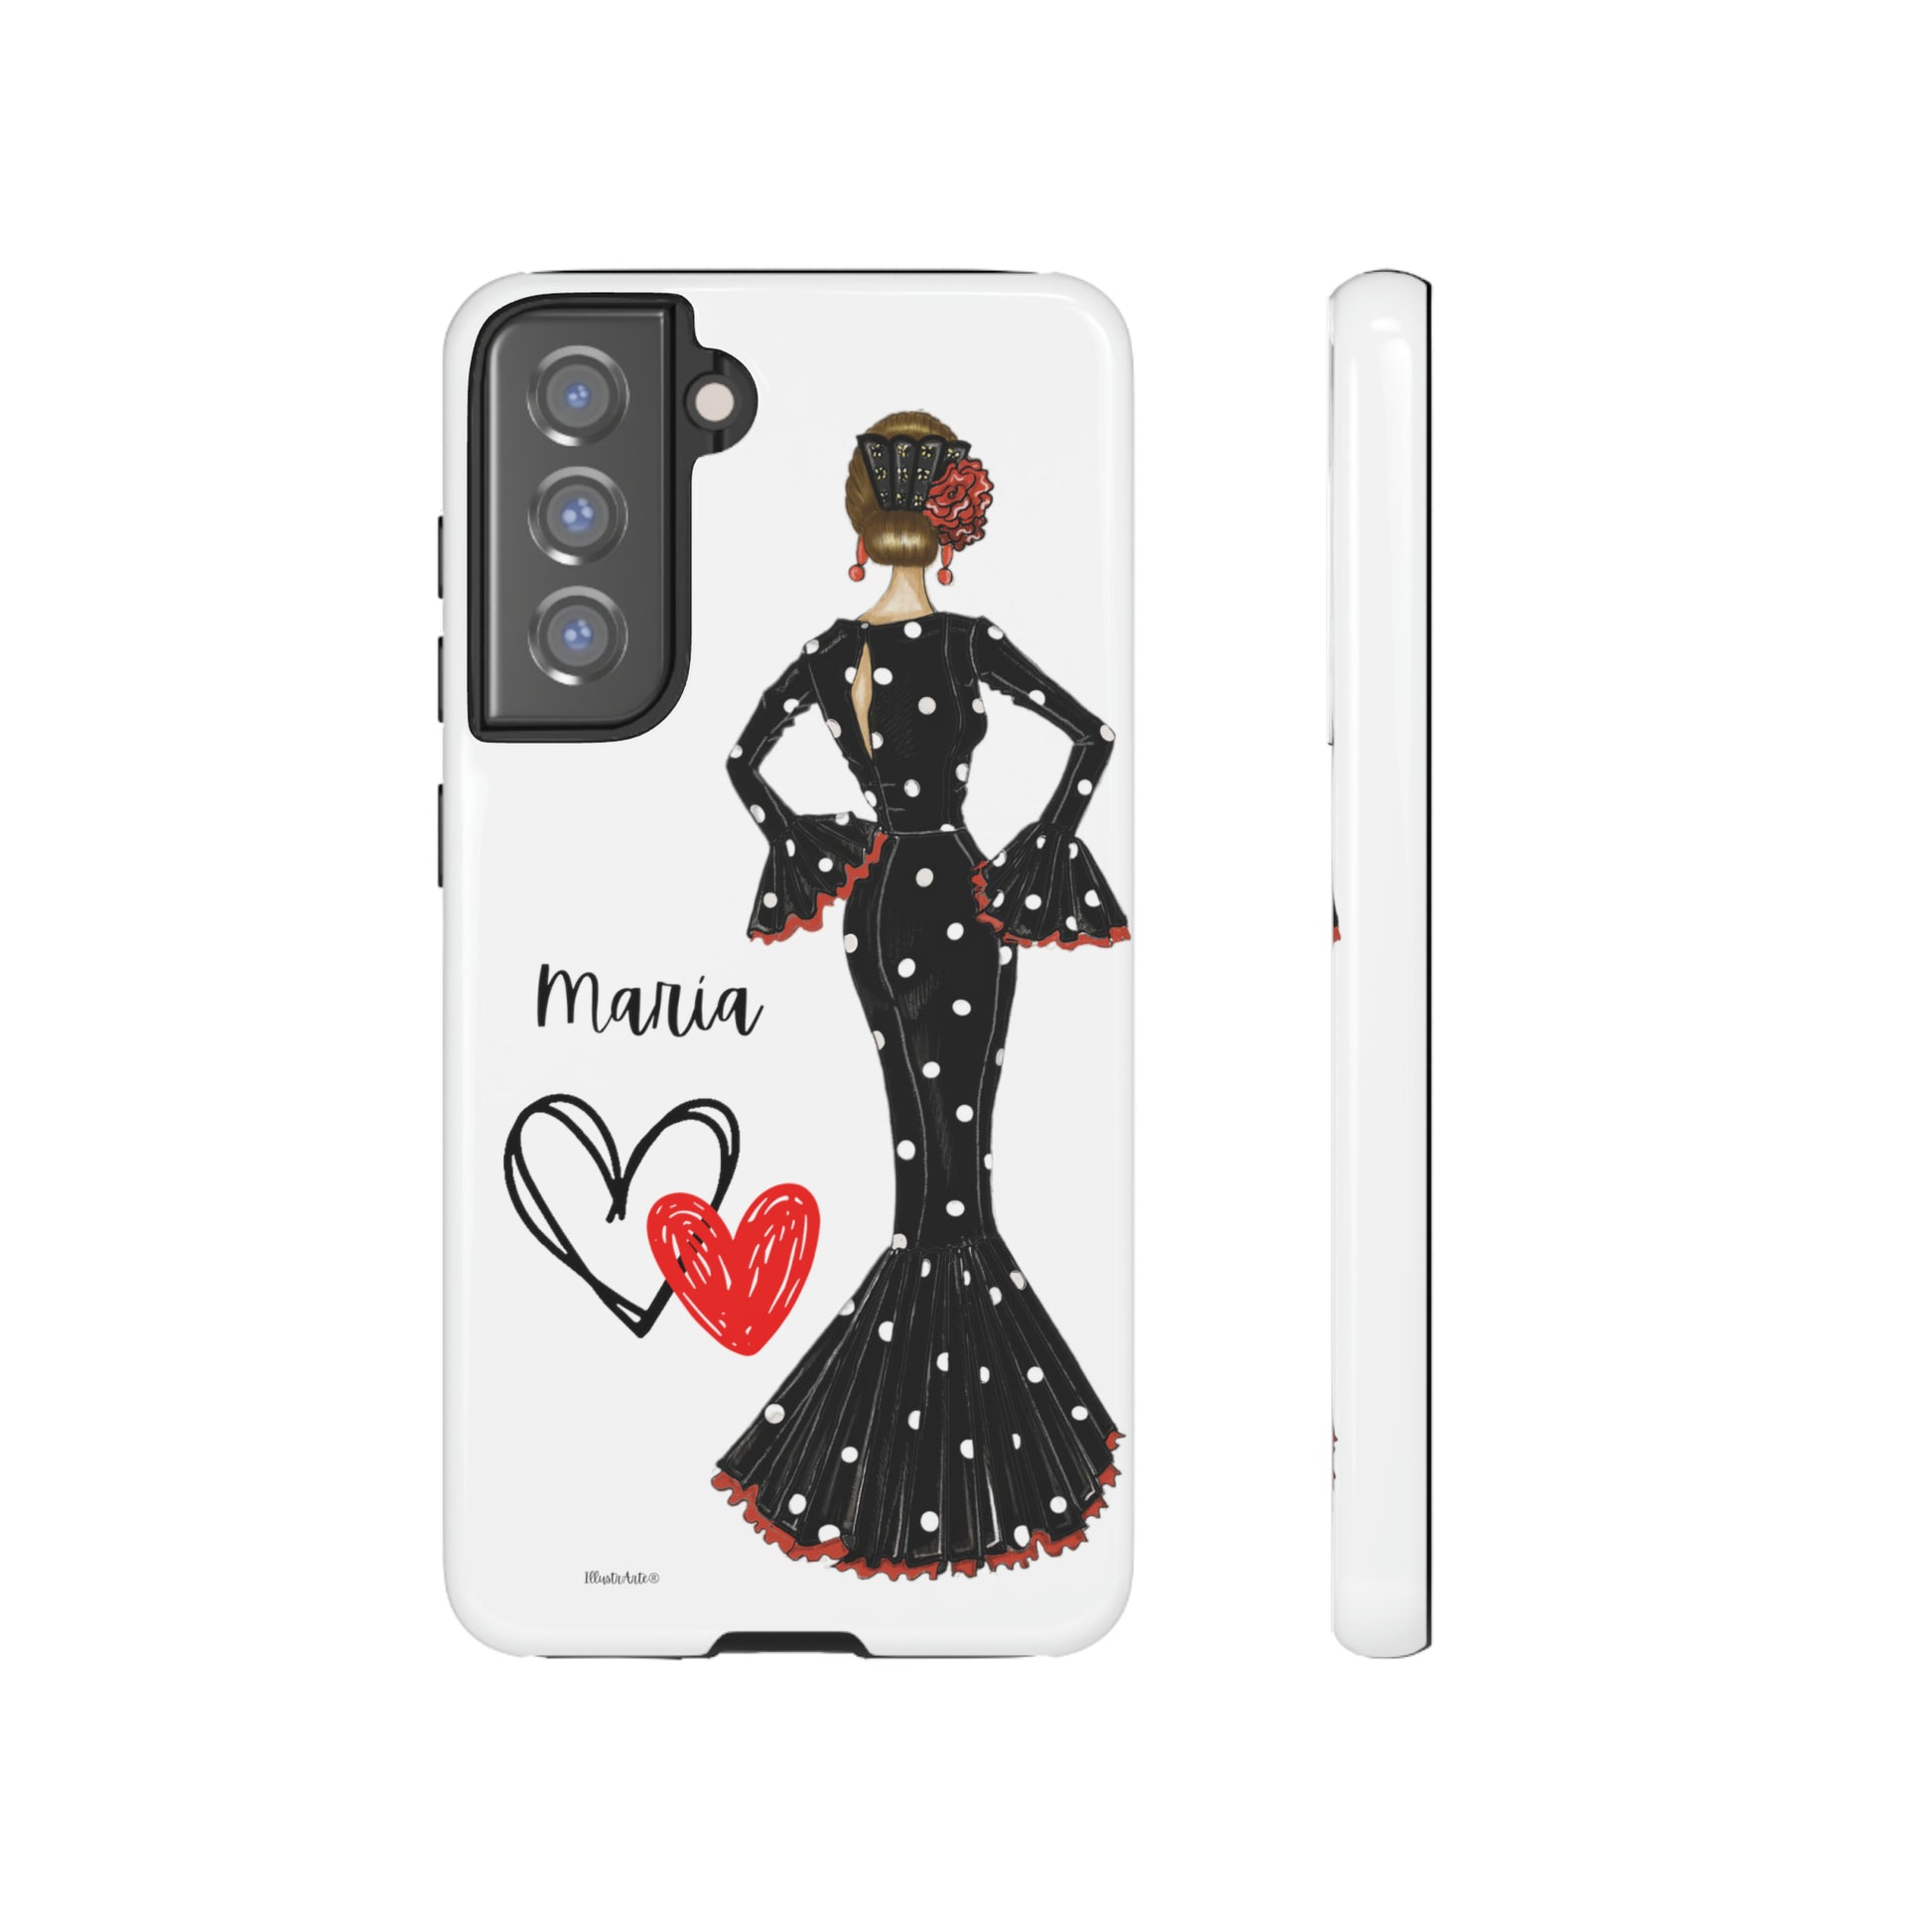 a phone case with a woman in a dress